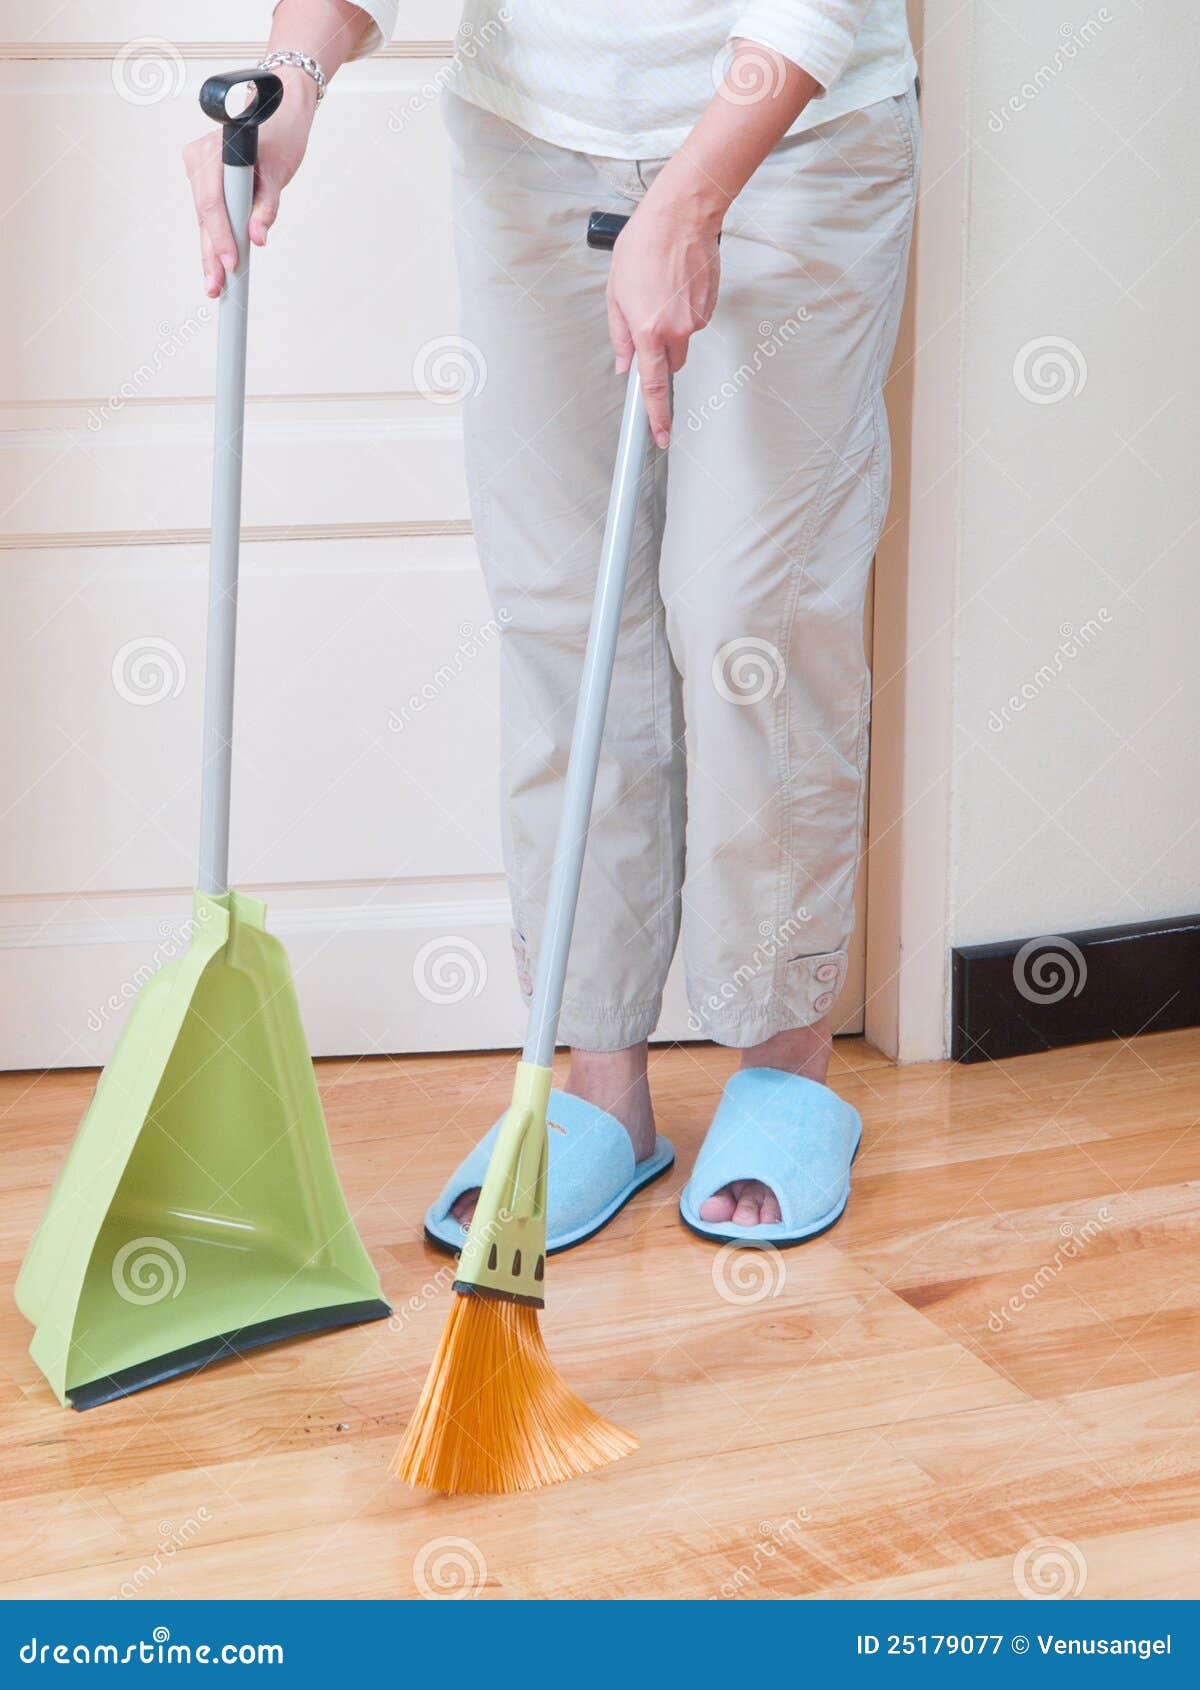 How To Use A Broom 528 Use Broom Stock Photos - Free & Royalty-Free Stock Photos from  Dreamstime